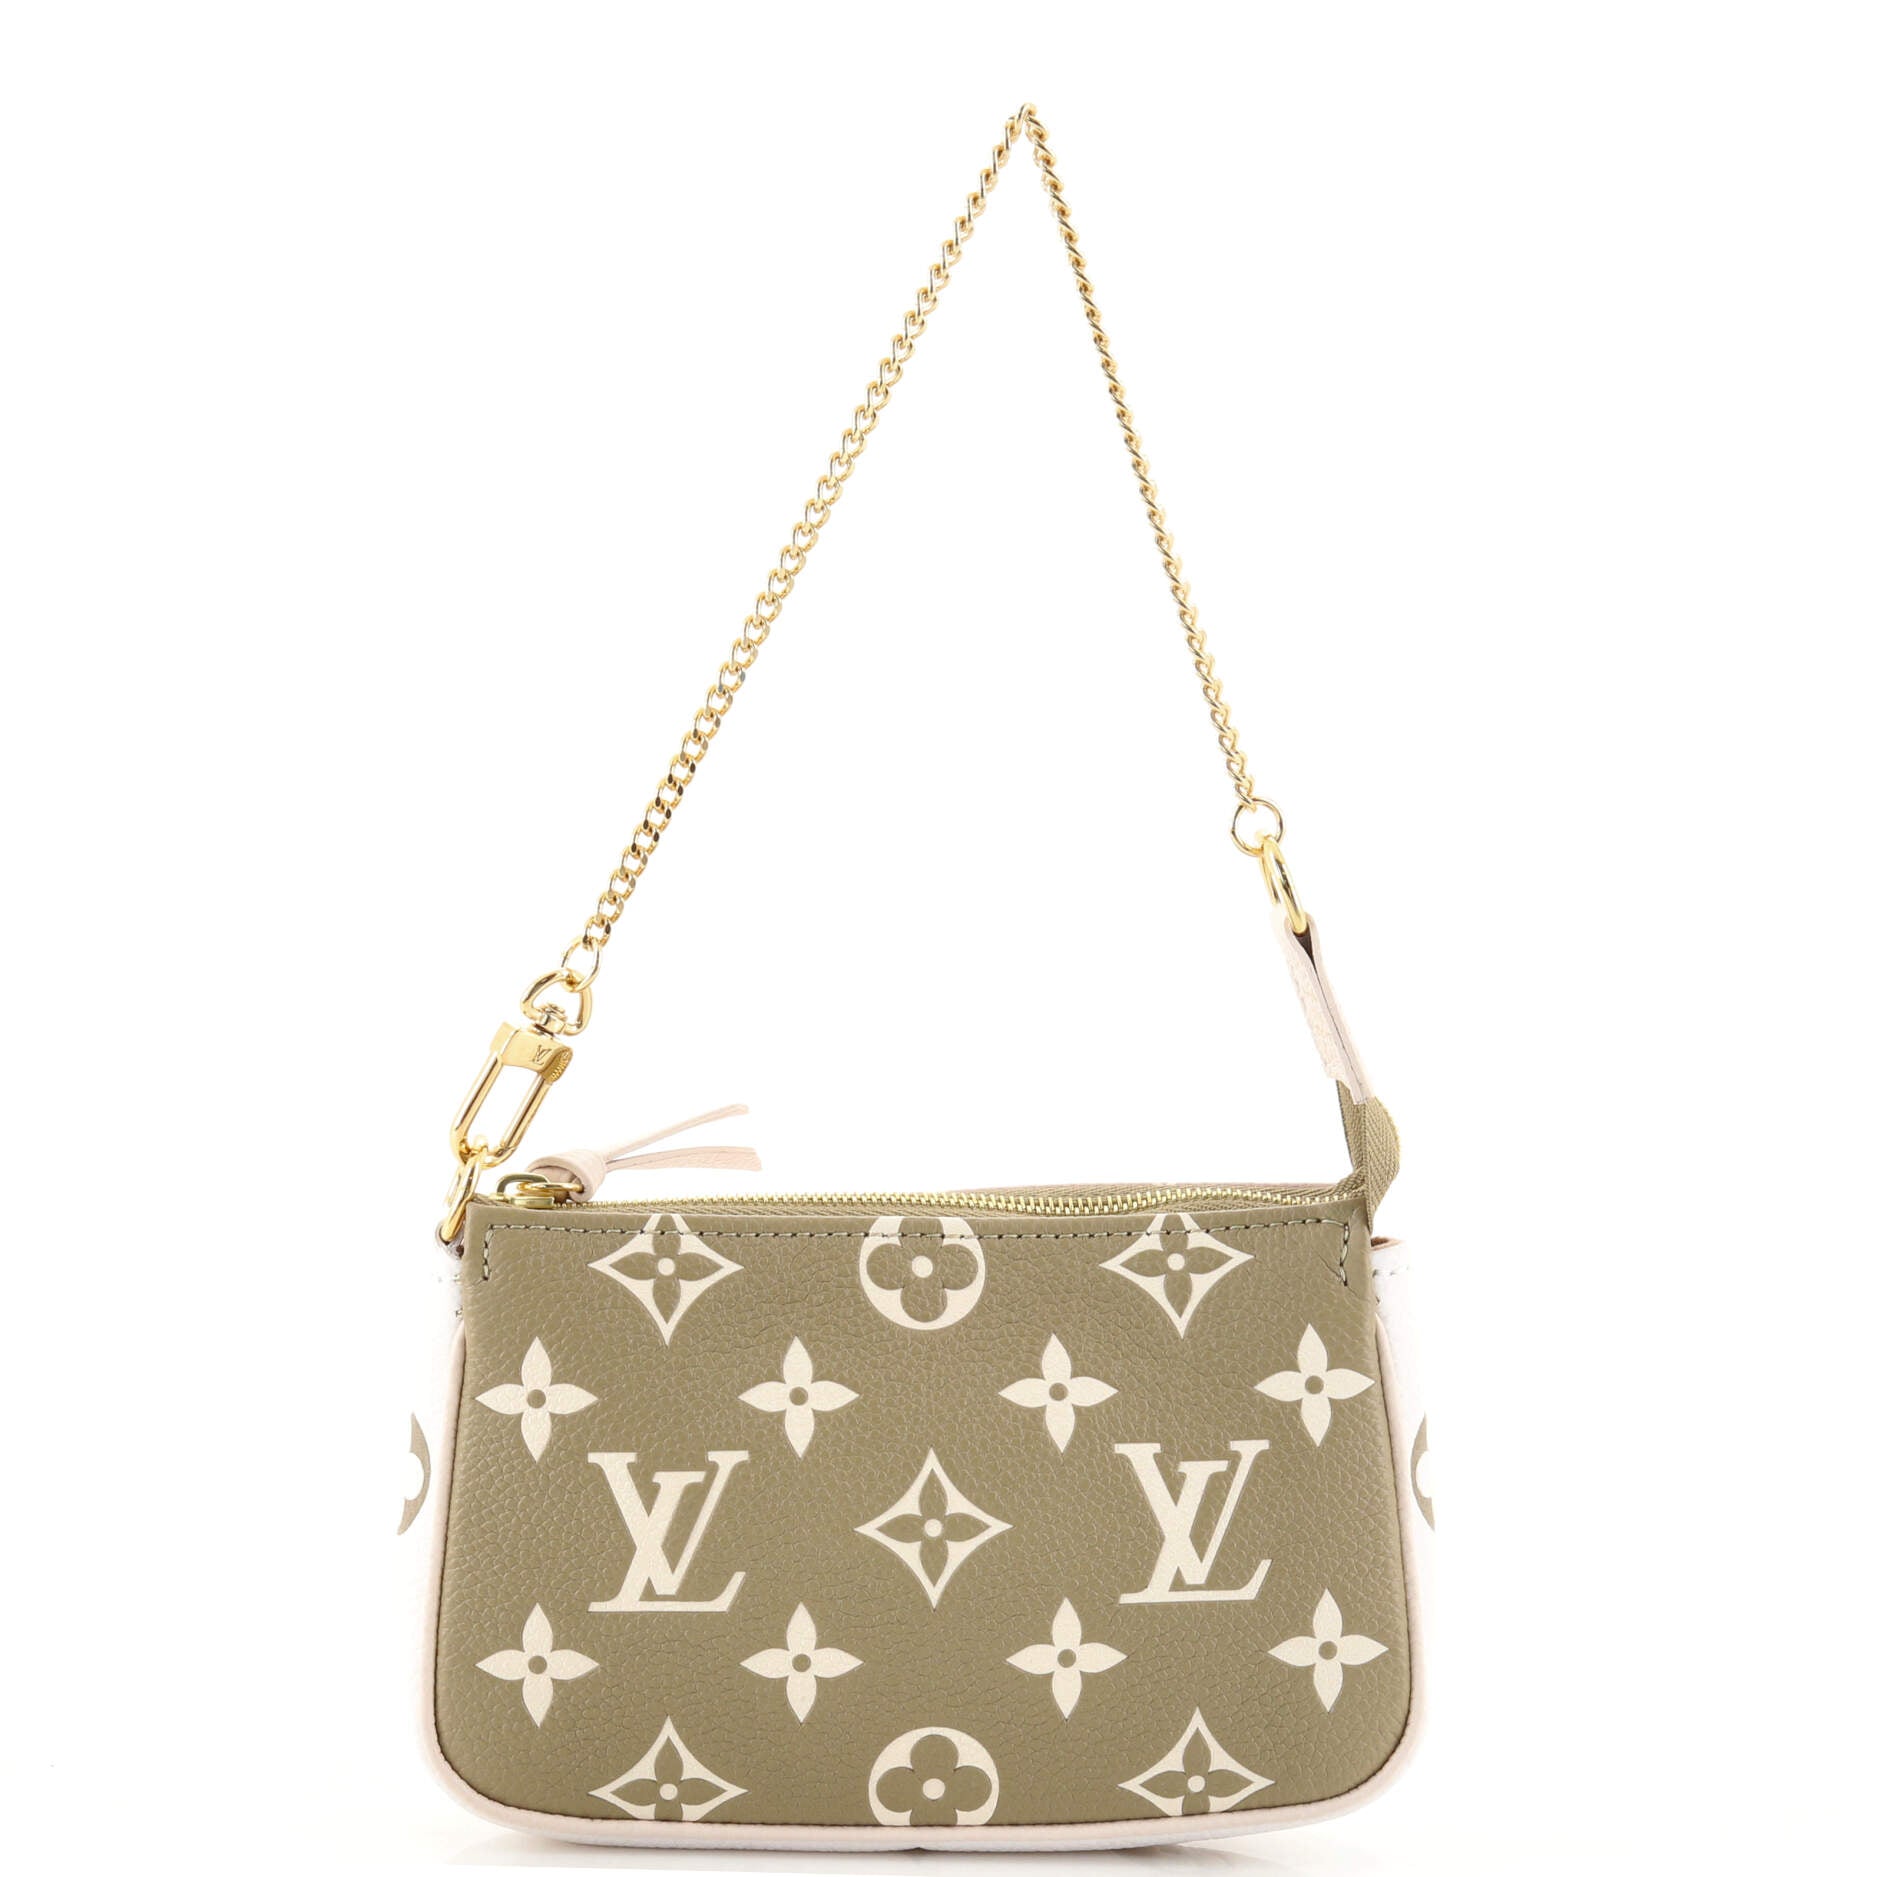 Authentic LV Fold Tote: Discounted 210352/148 | Rebag